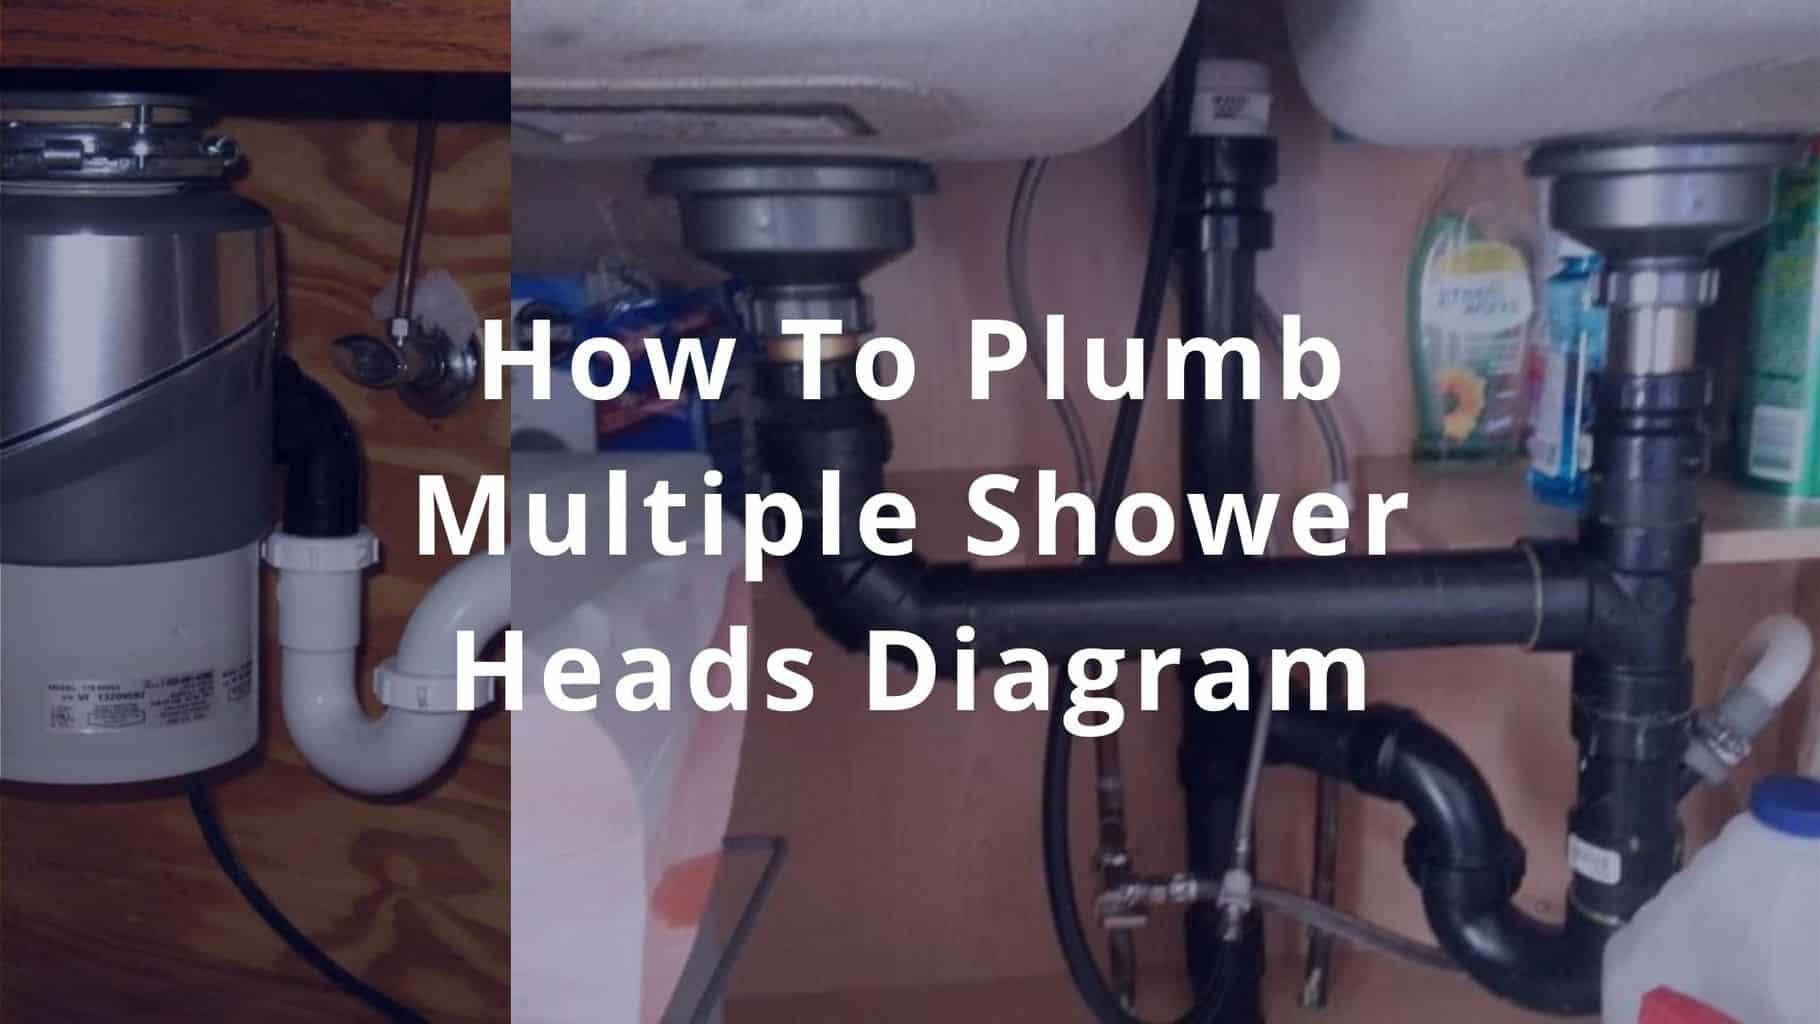 How To Plumb A Double Kitchen Sink With Disposal And Dishwasher Dreams Wire